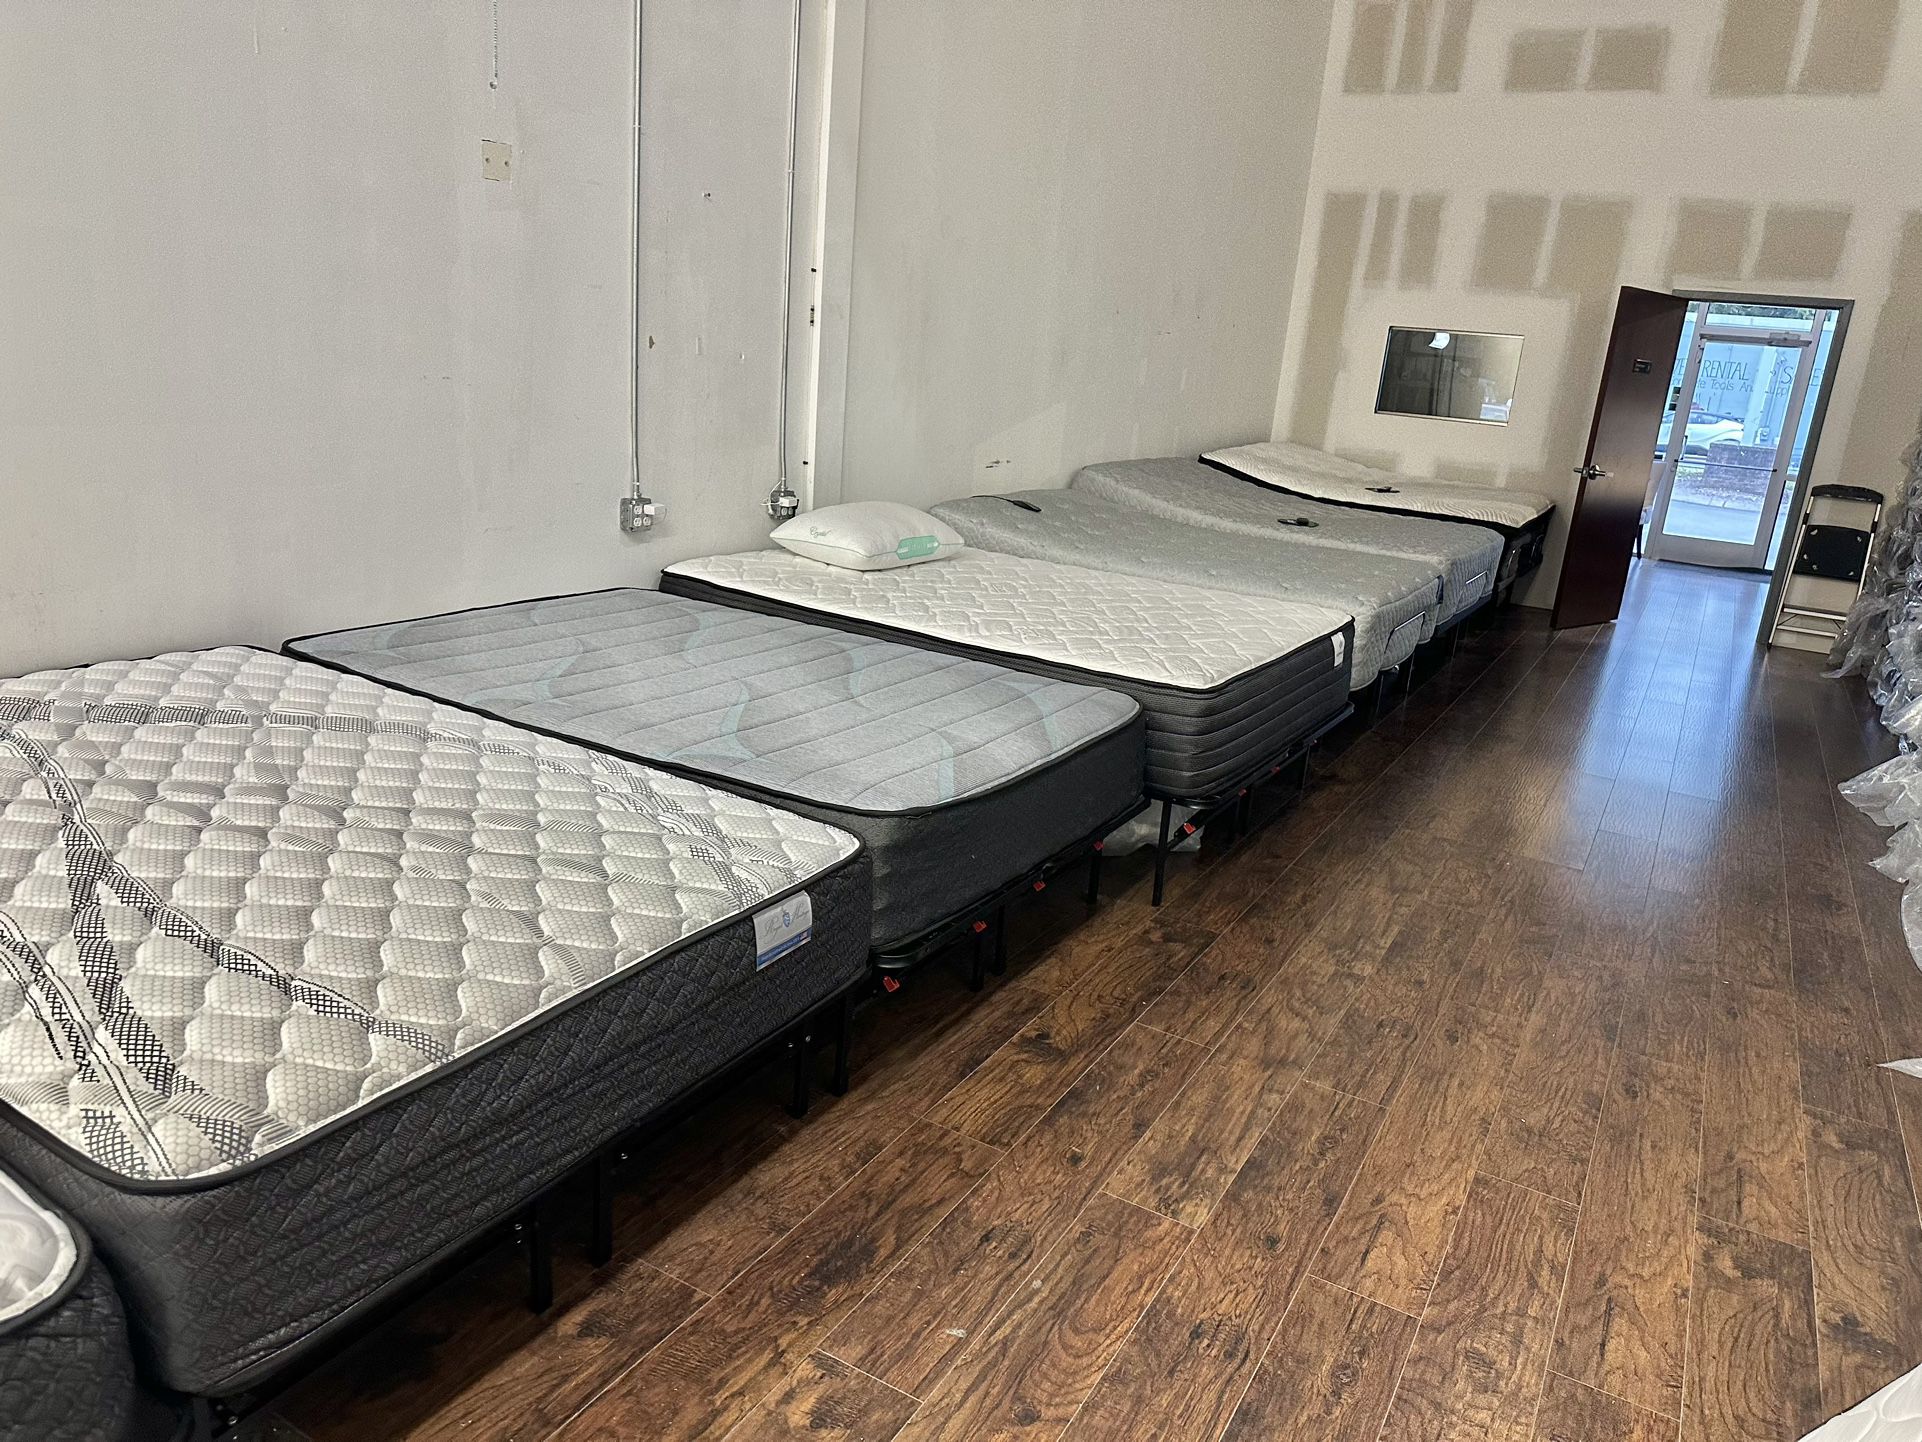 Need to Go! Mattresses of All Styles